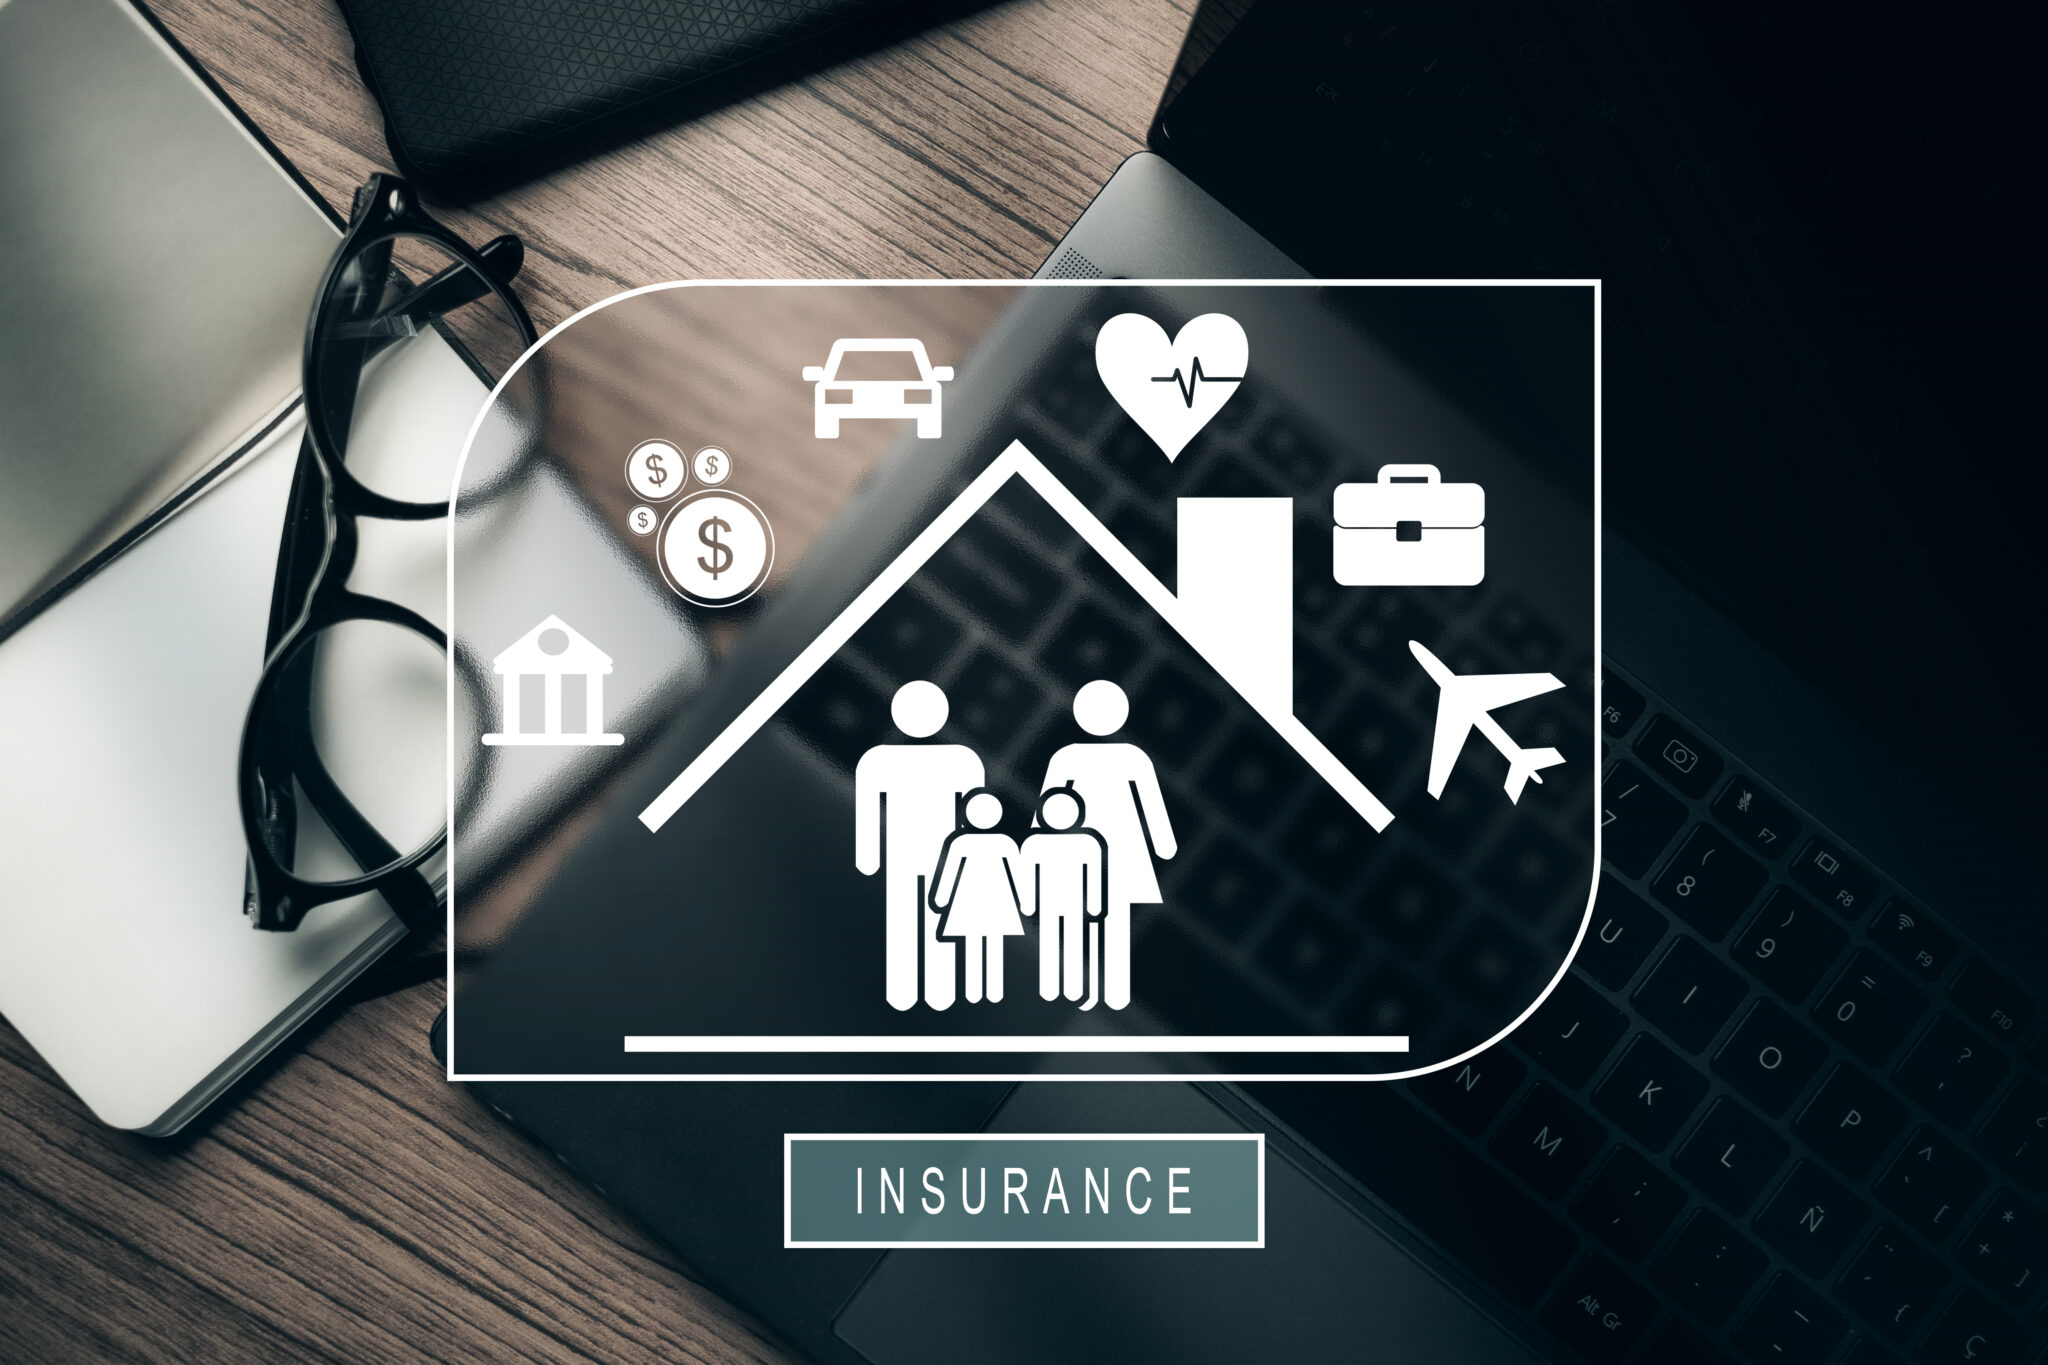 vr-icons-illustrating-coverage-policy-insurance-family-life-travel-health-bank-house